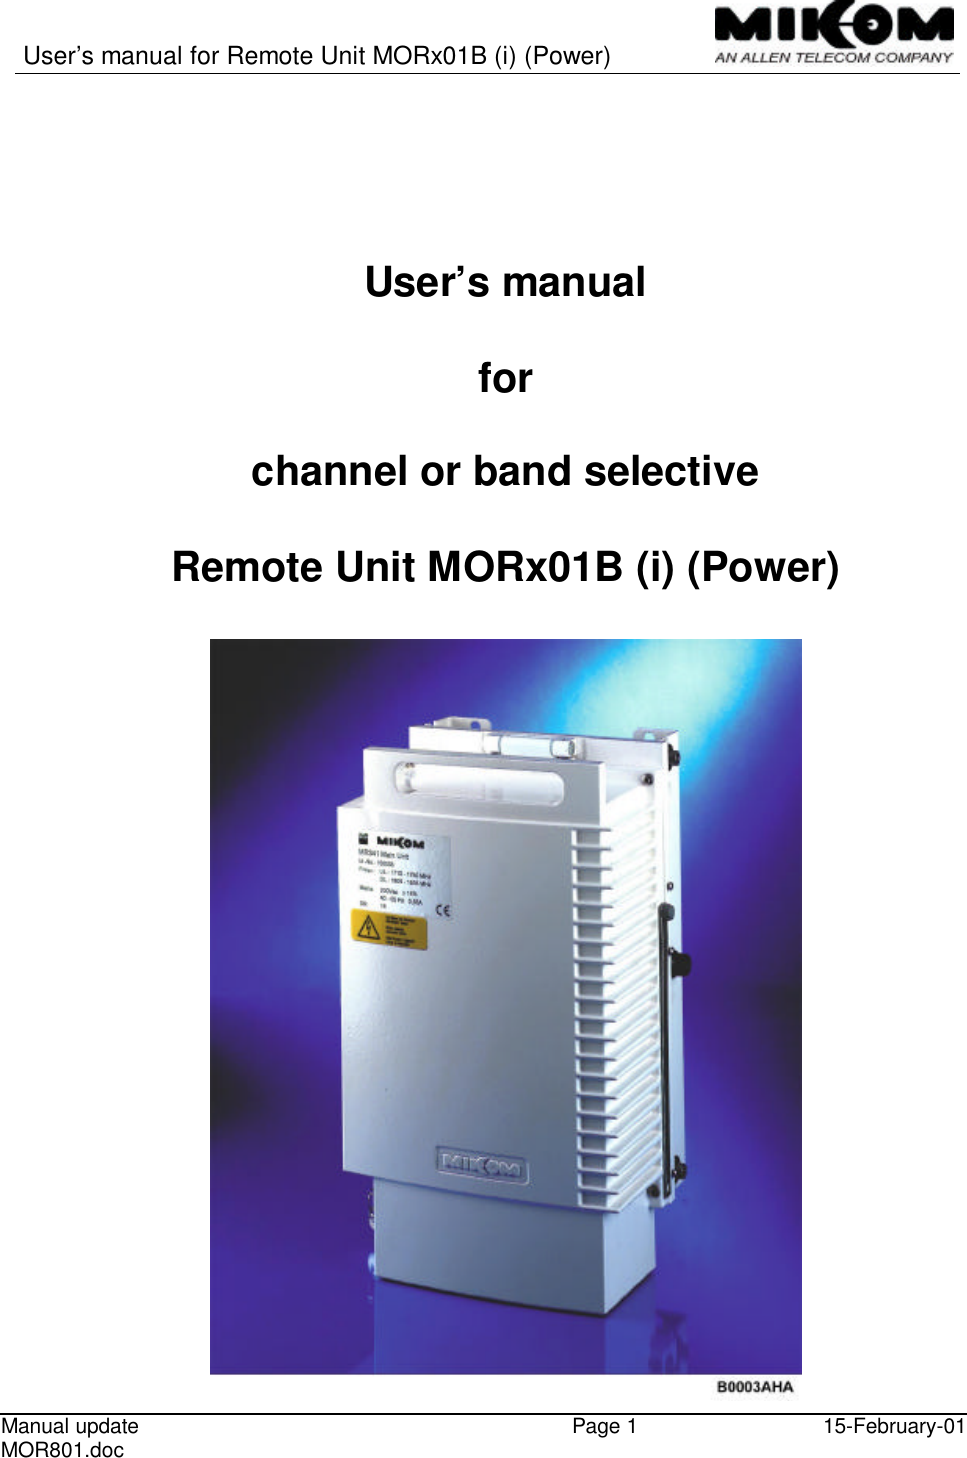   User’s manual for Remote Unit MORx01B (i) (Power)   Manual update MOR801.doc  Page 1 15-February-01       User’s manual   for  channel or band selective   Remote Unit MORx01B (i) (Power)   